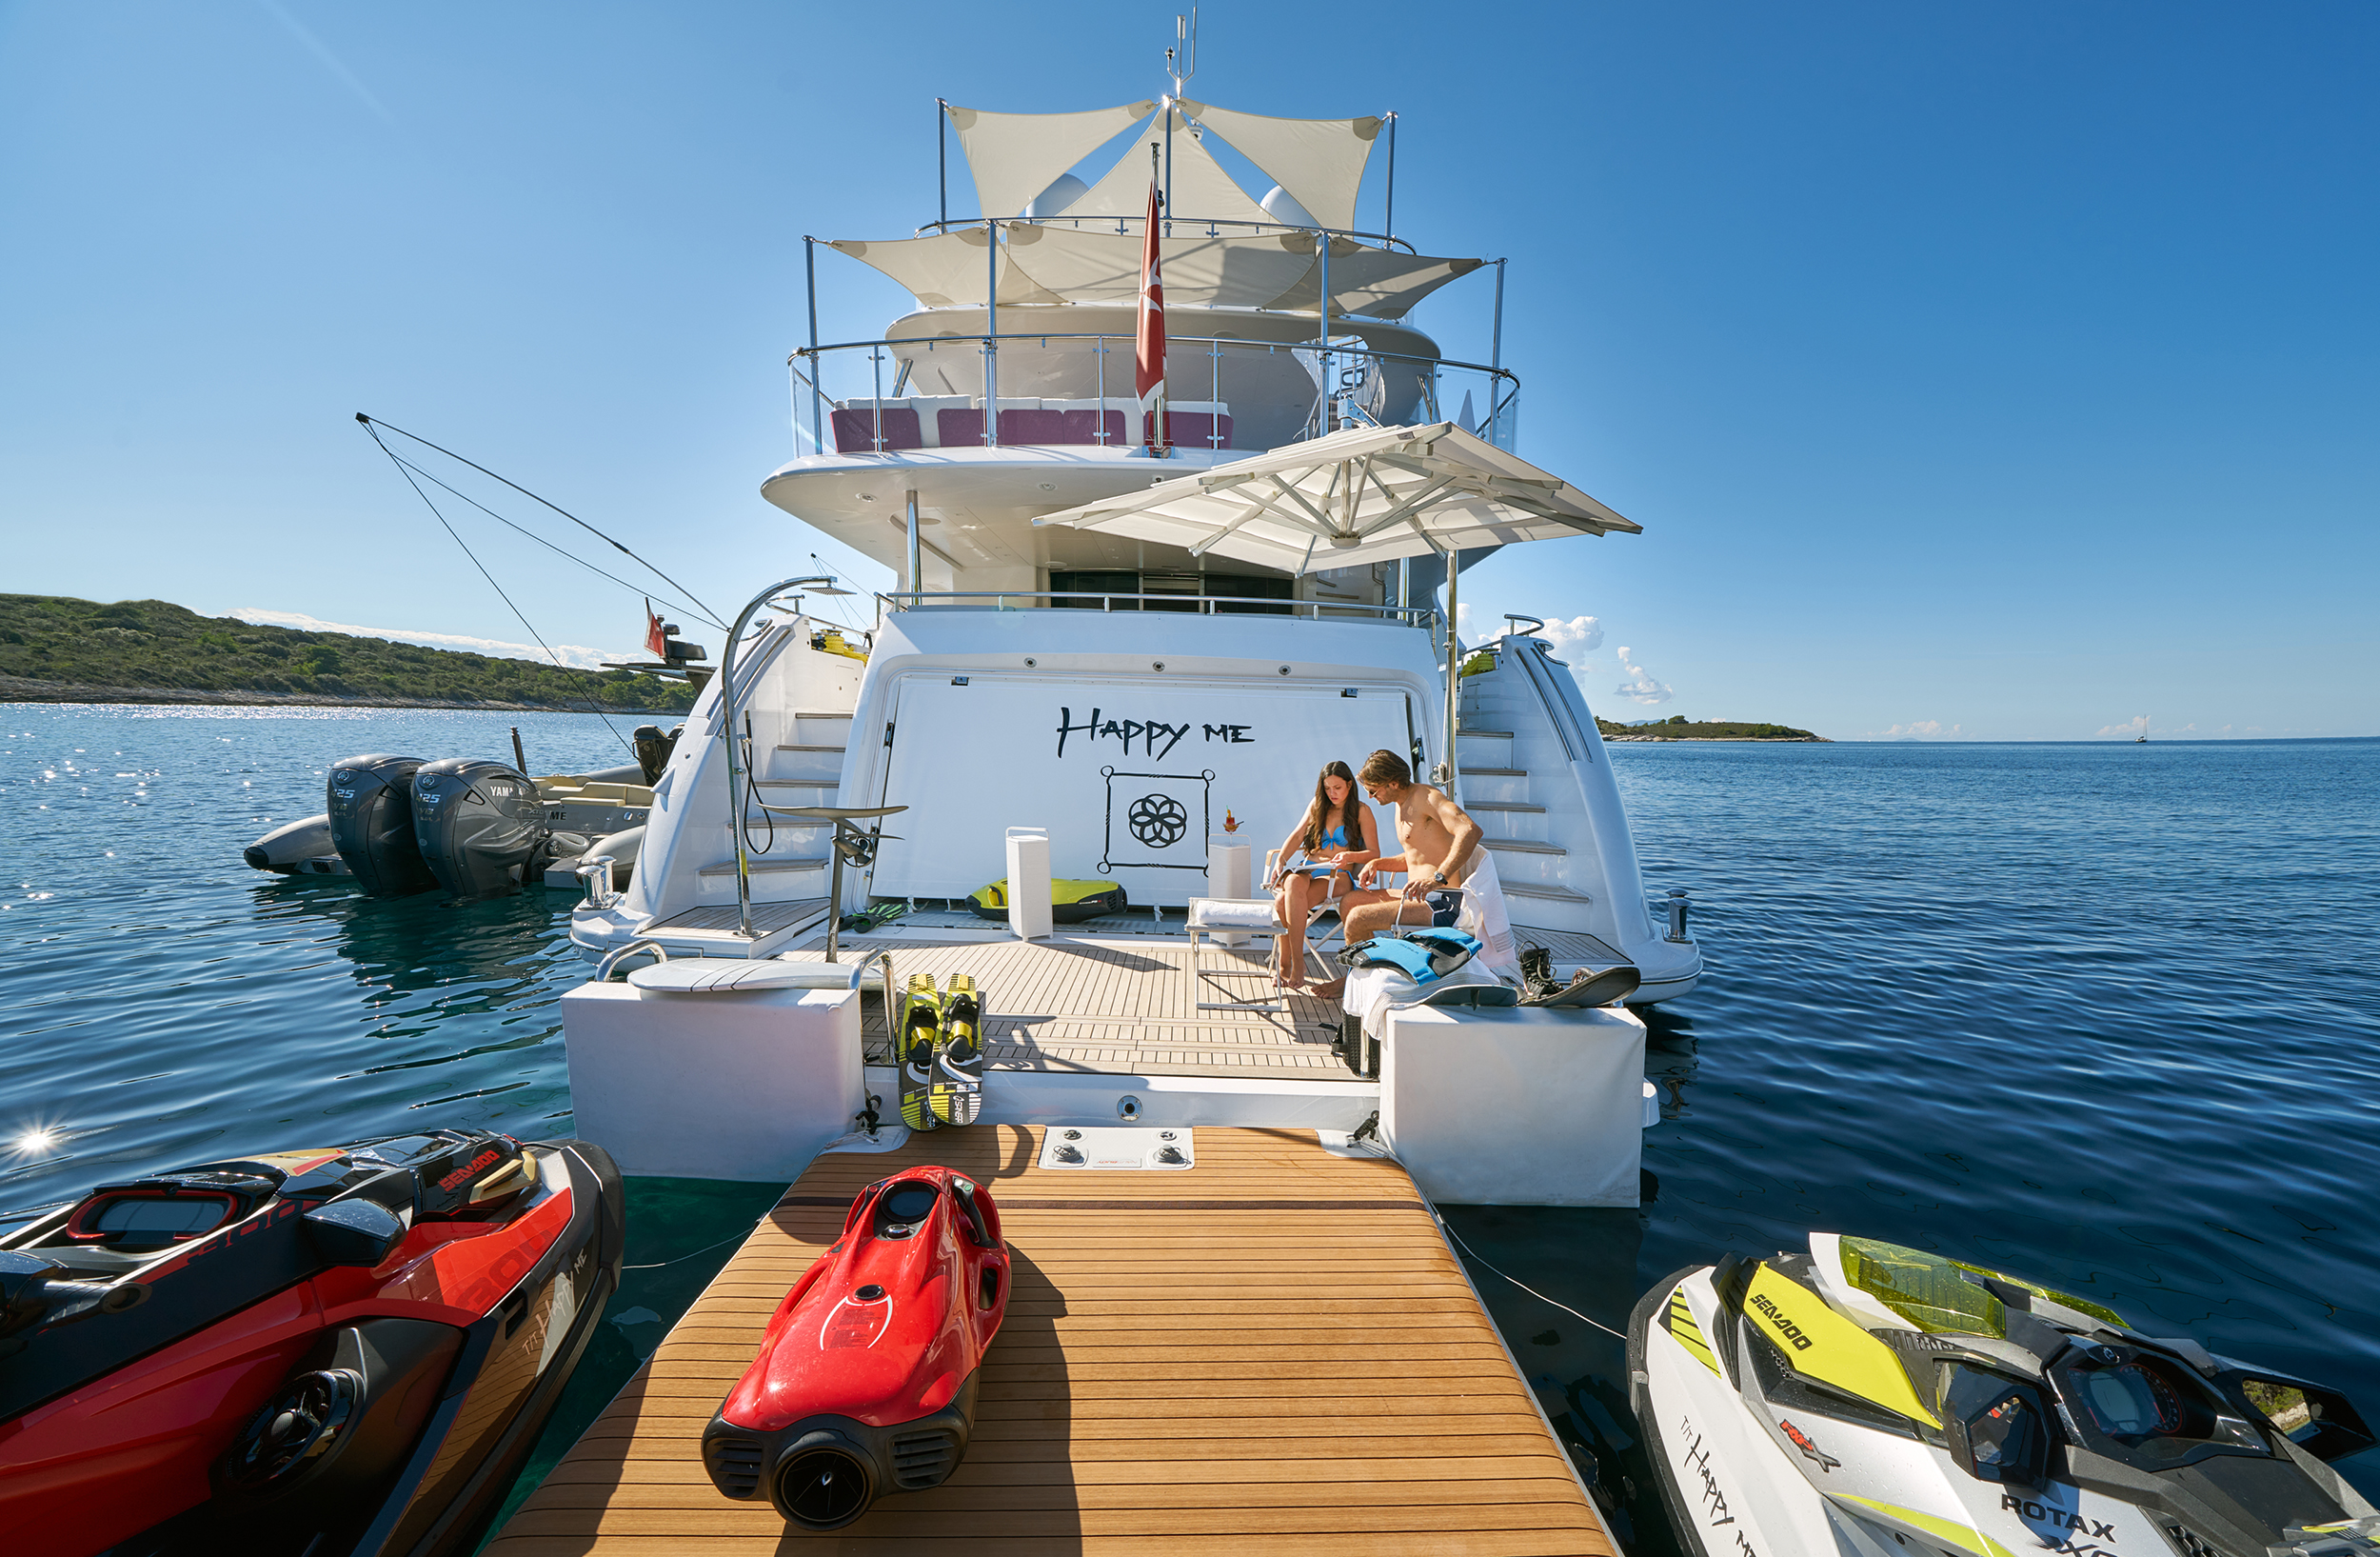 Couple On The Yacht's Swim Platform And Toys